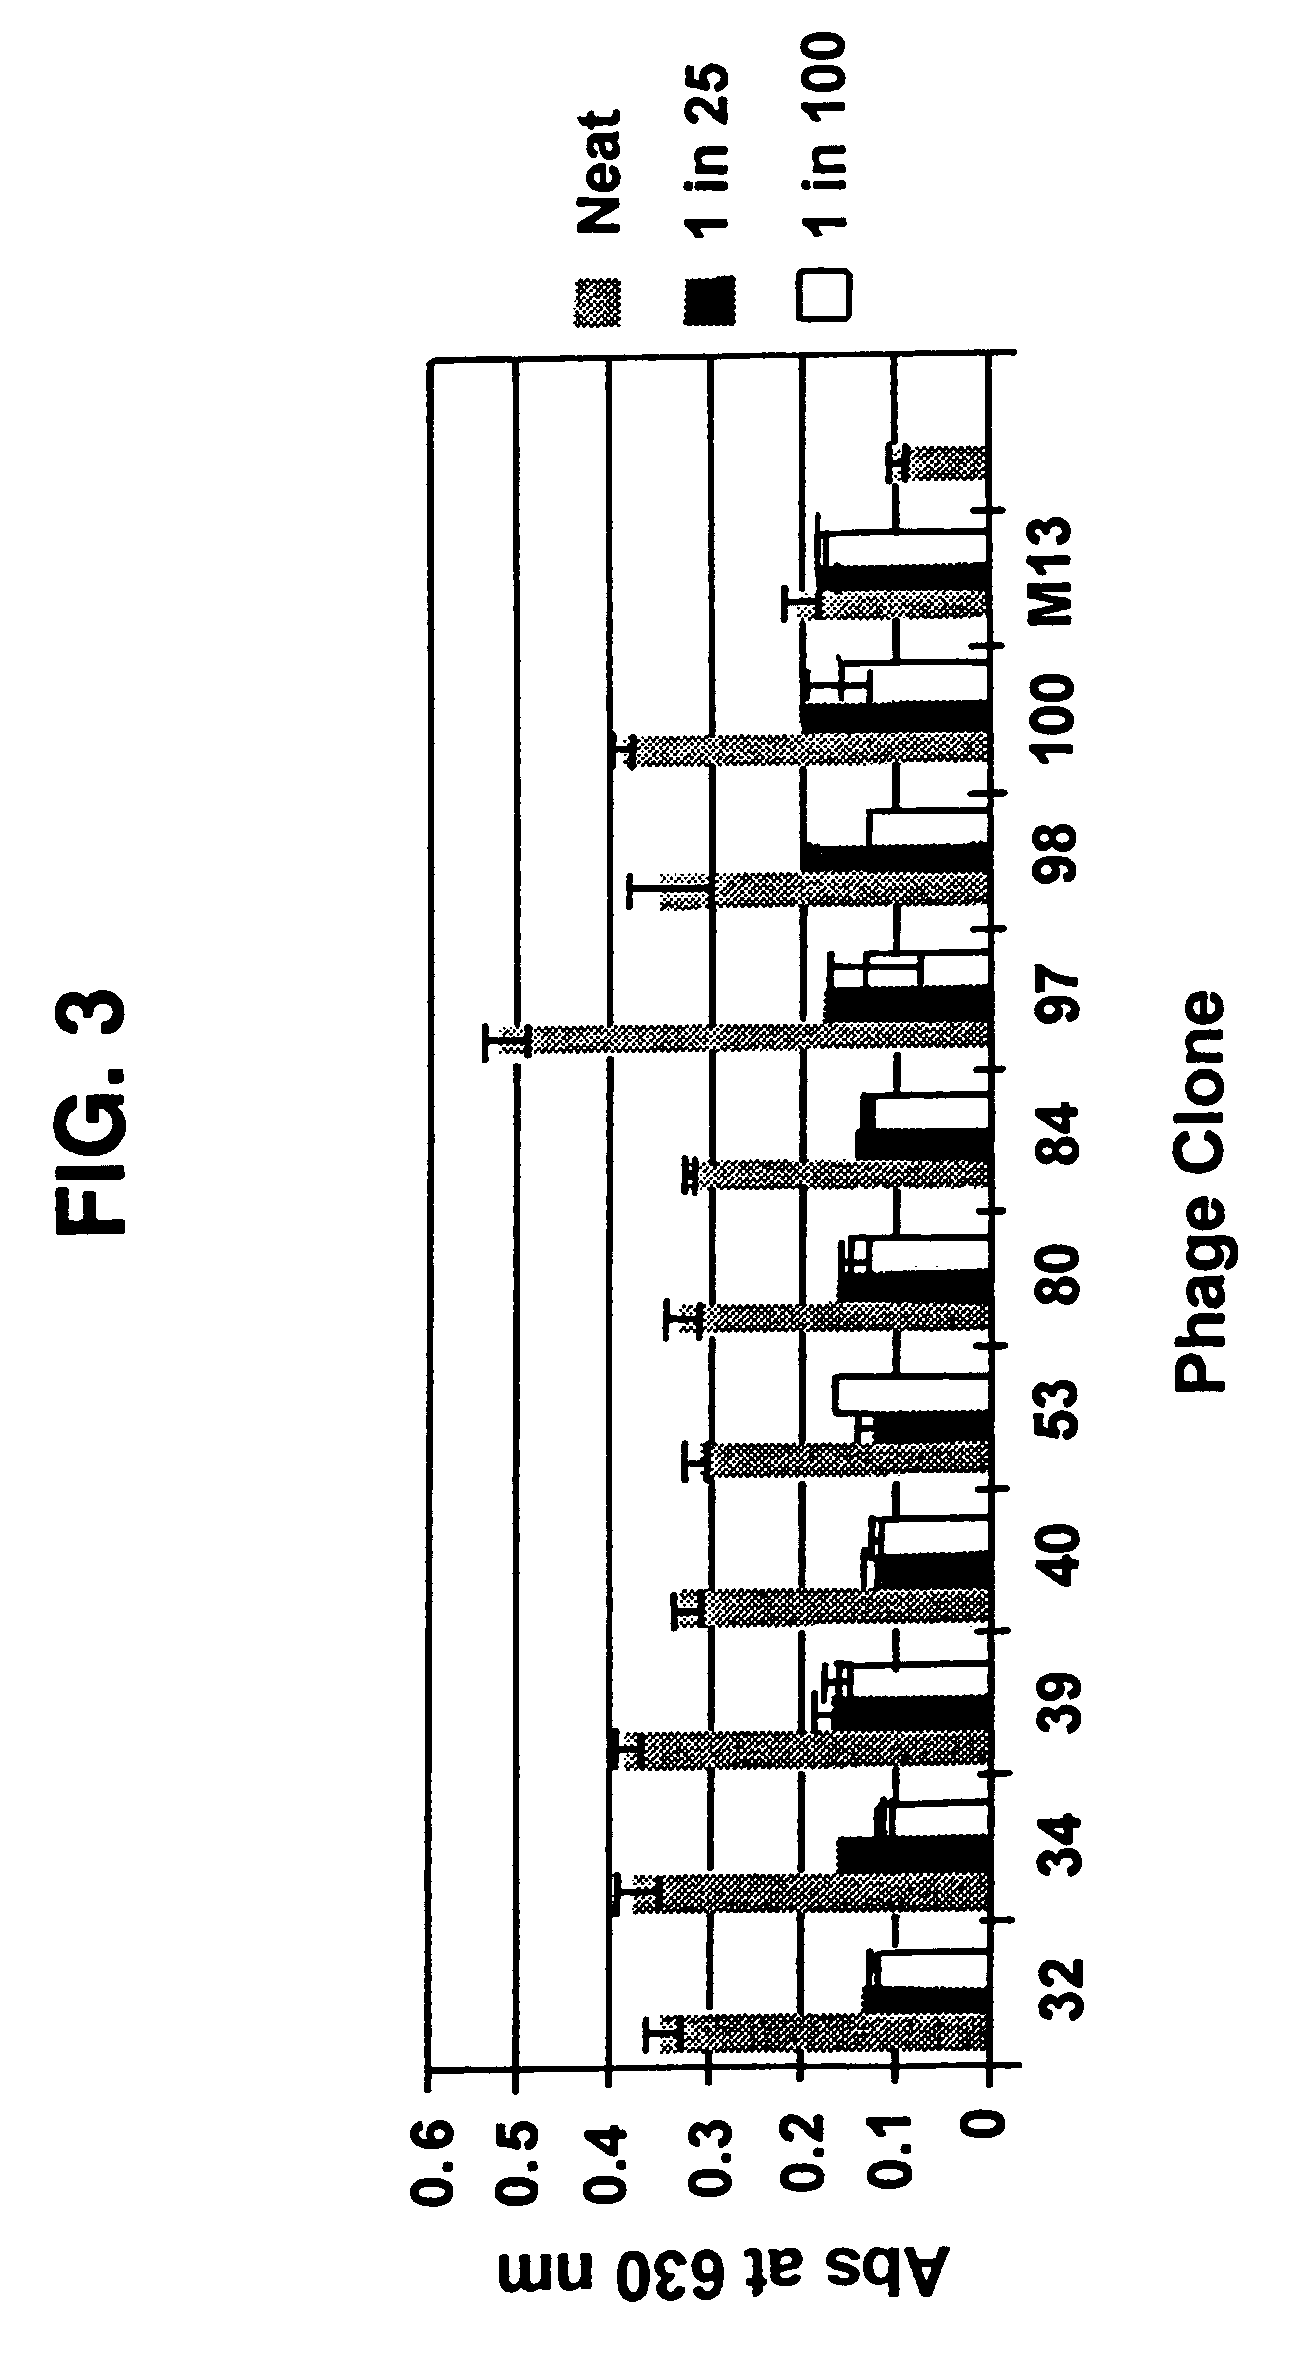 Peptides which enhance transport across tissues and methods of identifying and using the same